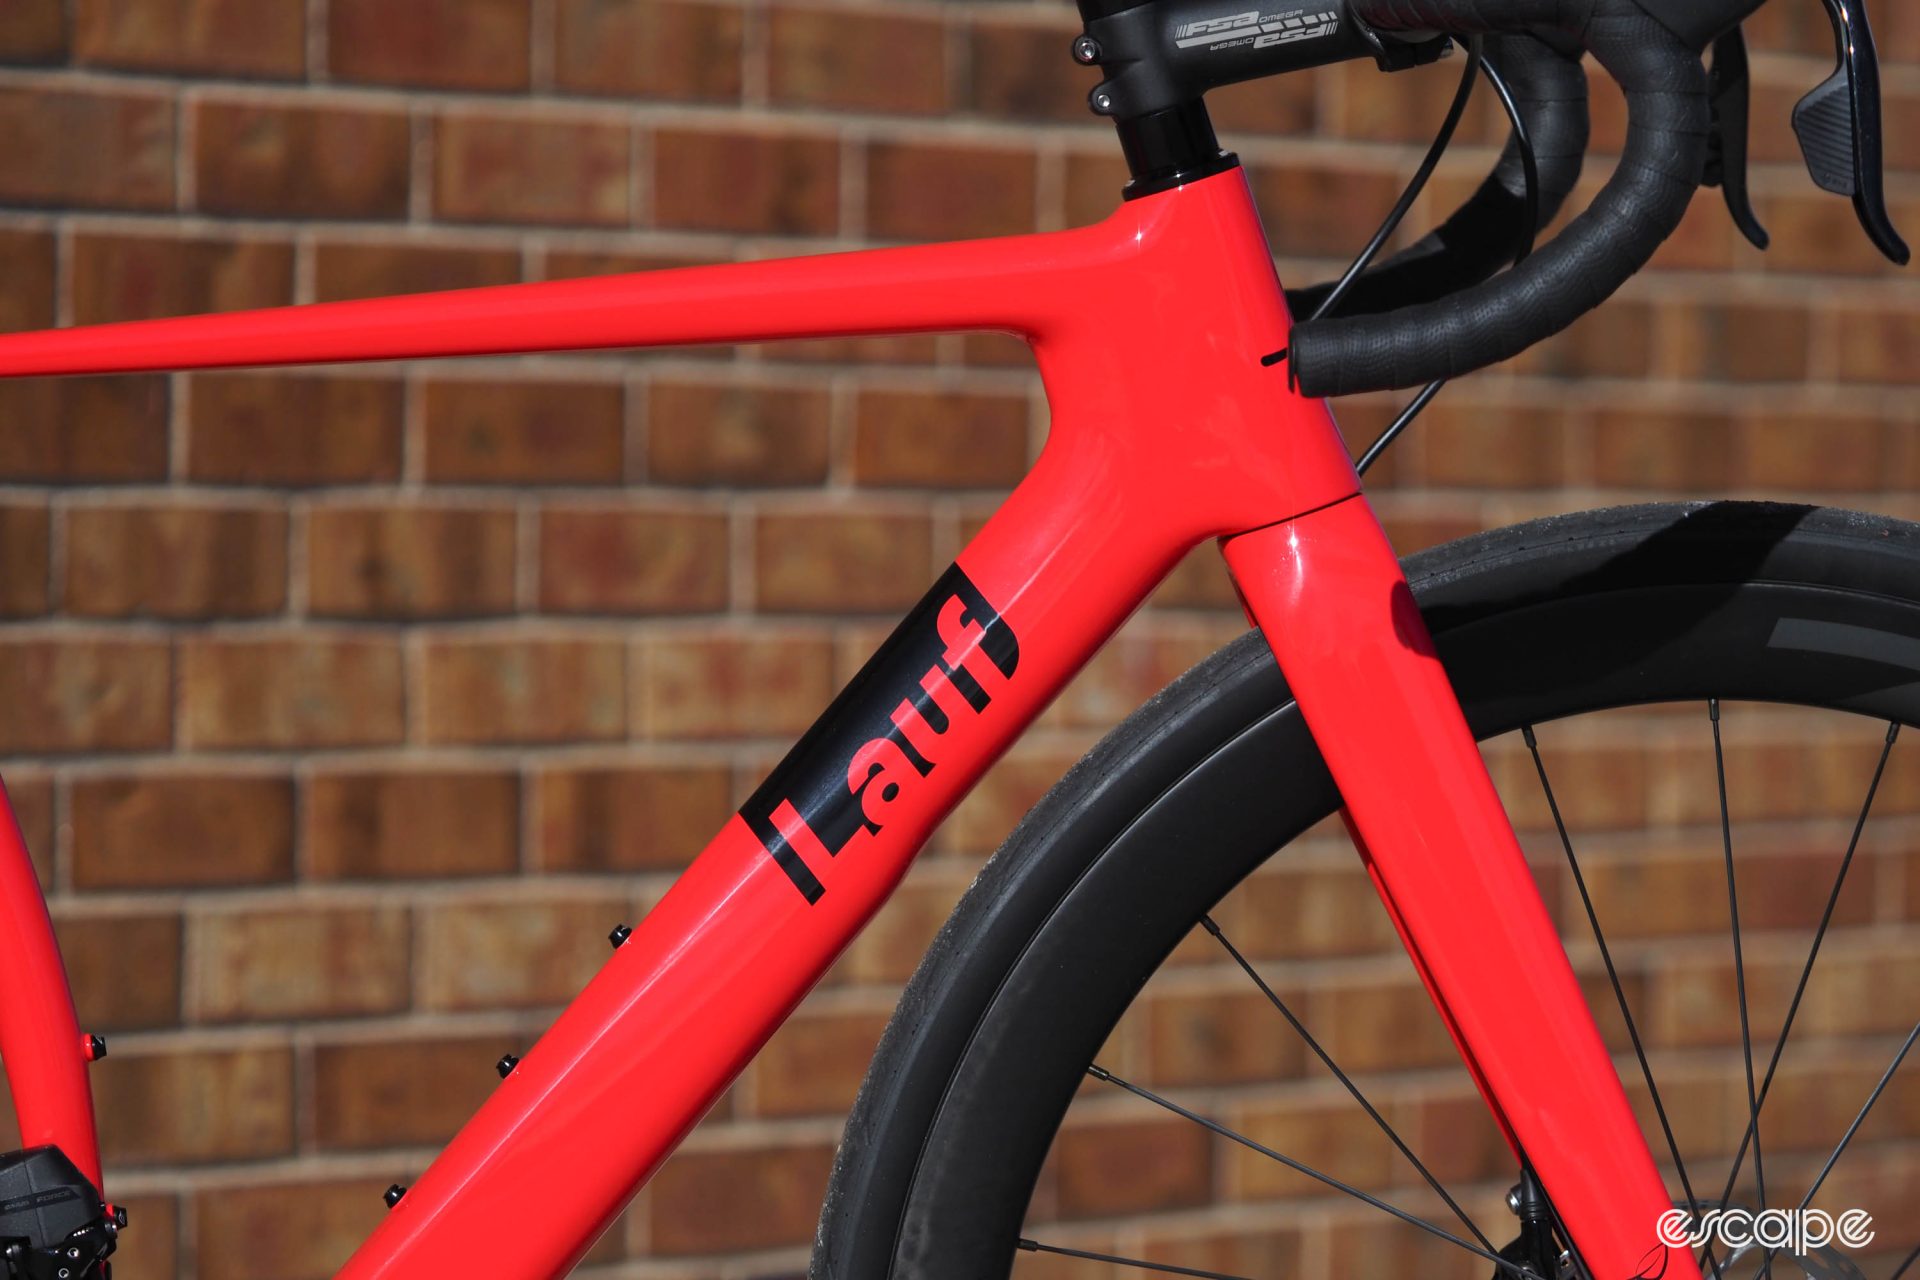 Lauf Uthald front end profile